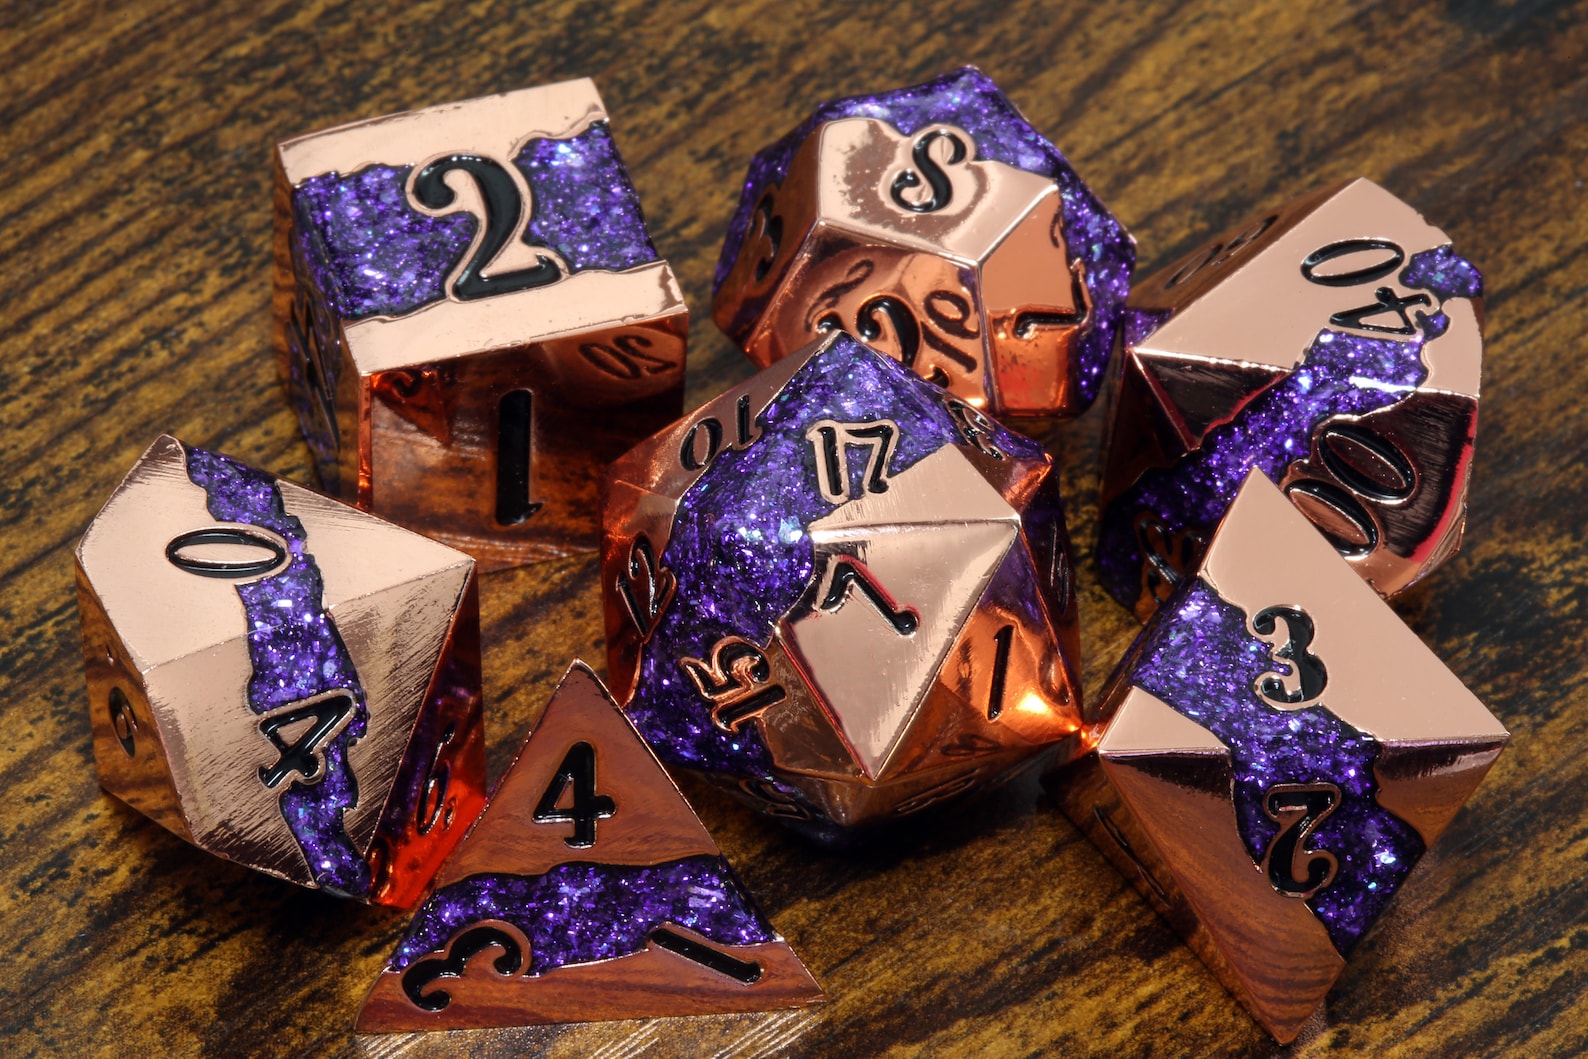 Mana Ore, Purple mica stripe dice set with shiny copper metal - The Wizard's Vault